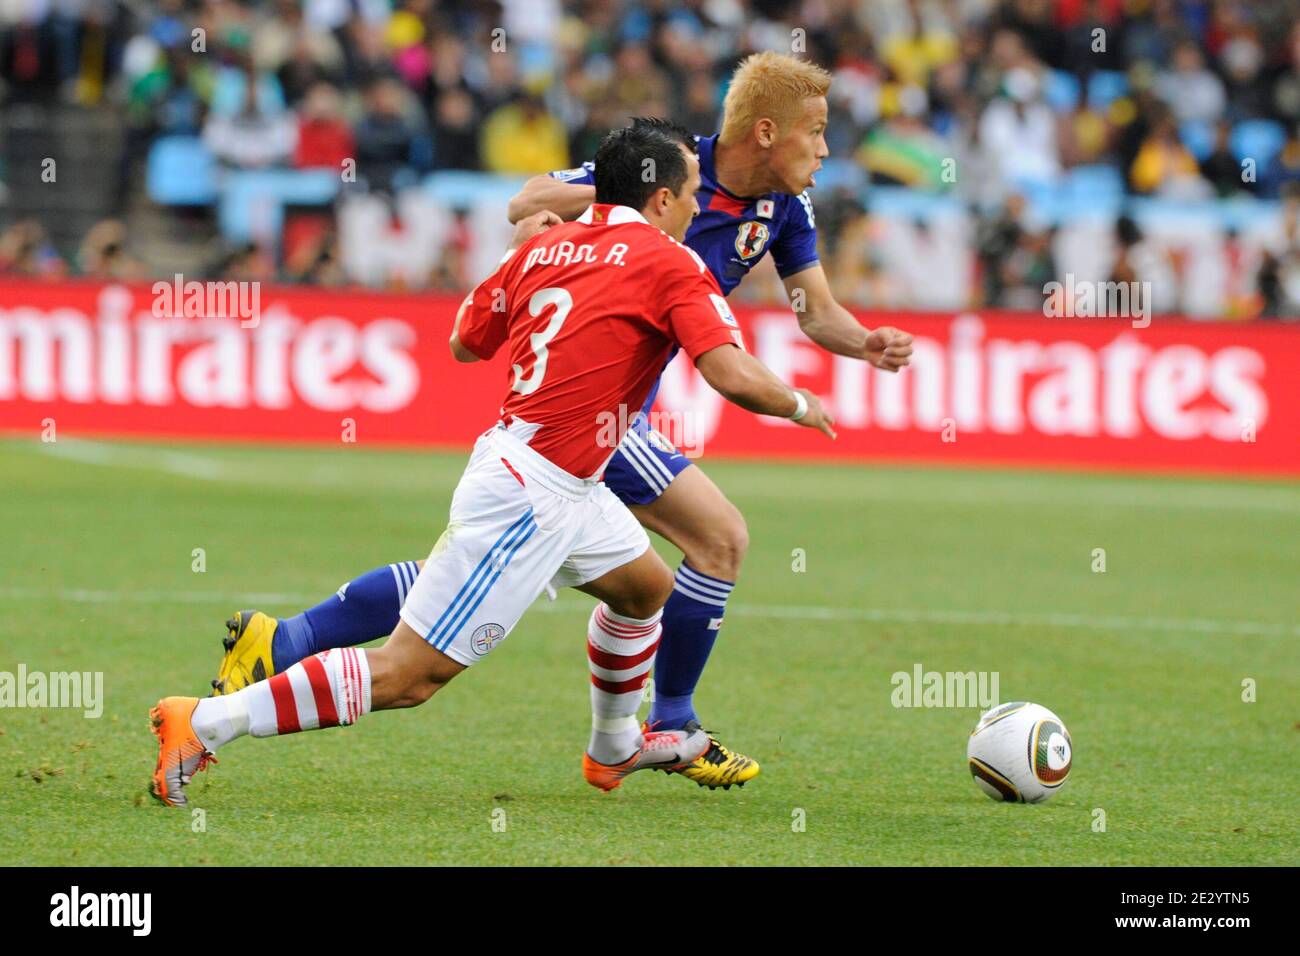 Paraguay's Claudio Morel and Japan's Keisuke Honda fight for the ball during the 2010 FIFA World Cup South Africa 1/8 of final Soccer match, Paraguay vs Japan at Loftus Versfeld football stadium in Pretoria, South Africa on June 29, 2010. Paraguay won 0-0 (5p to 3 after penalties). Photo by Henri Szwarc/ABACAPRESS.COM Stock Photo